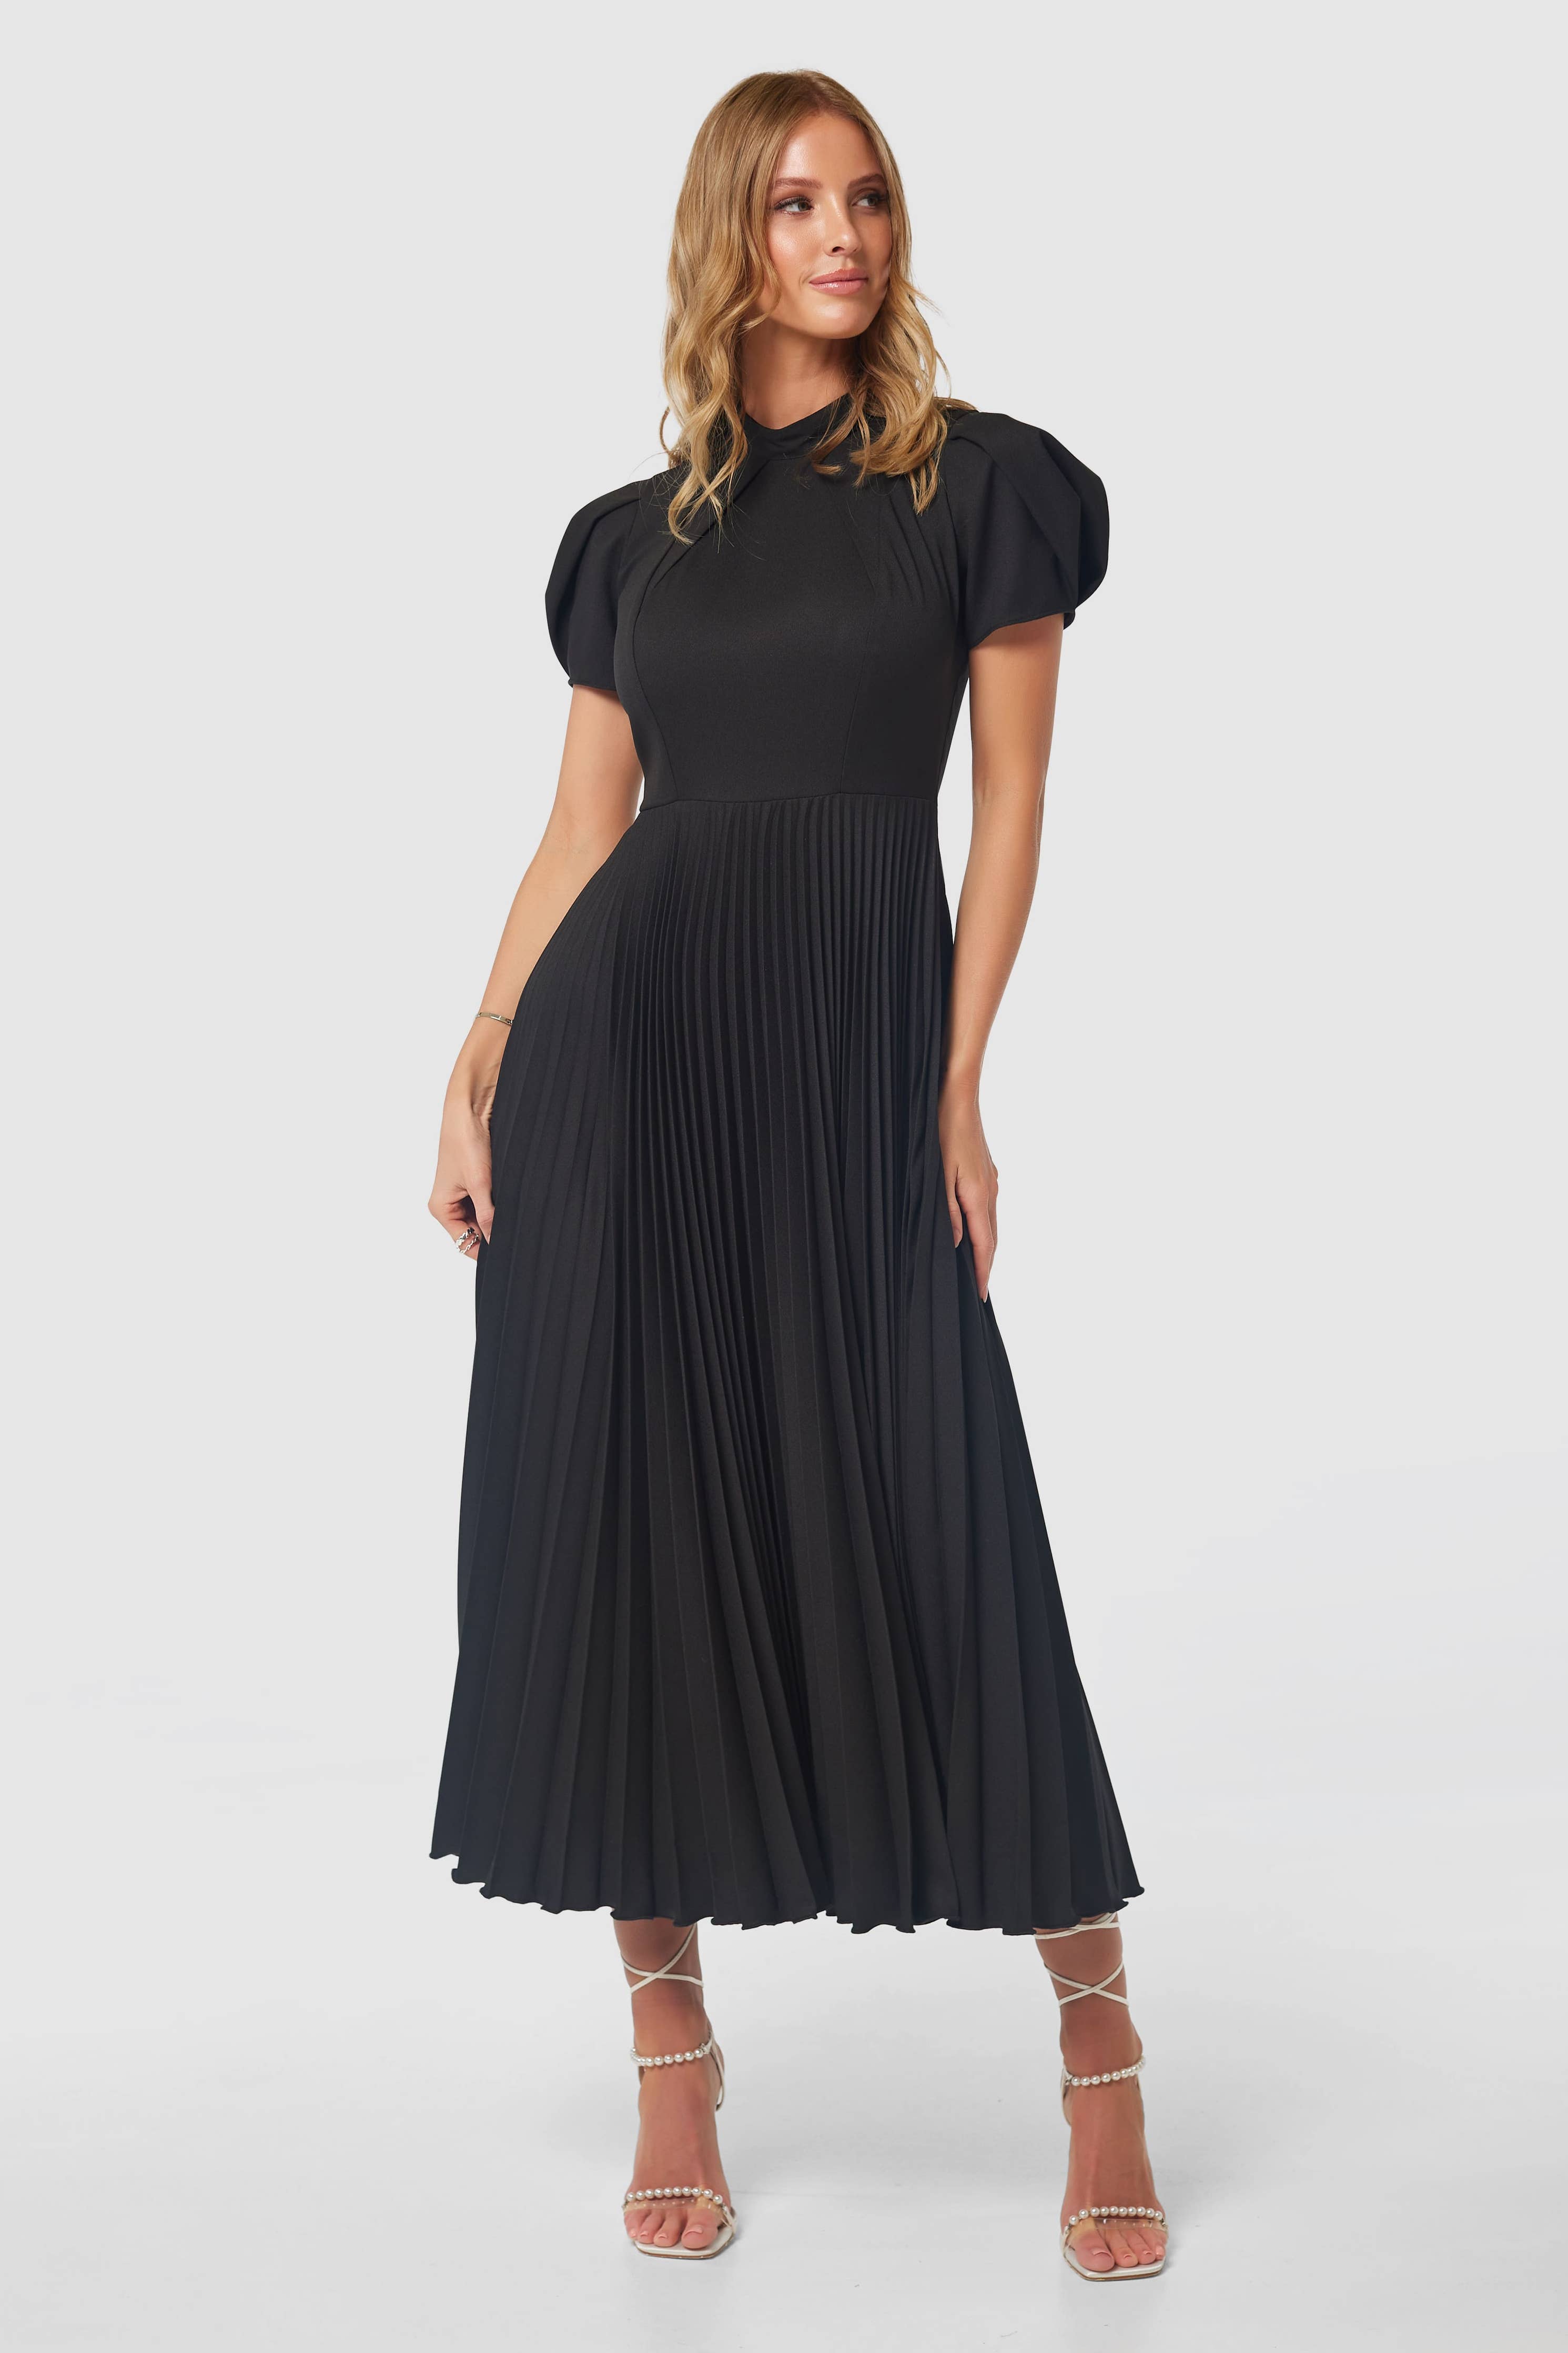 Closet London Pleated Dress D9879 - Out of the Blue